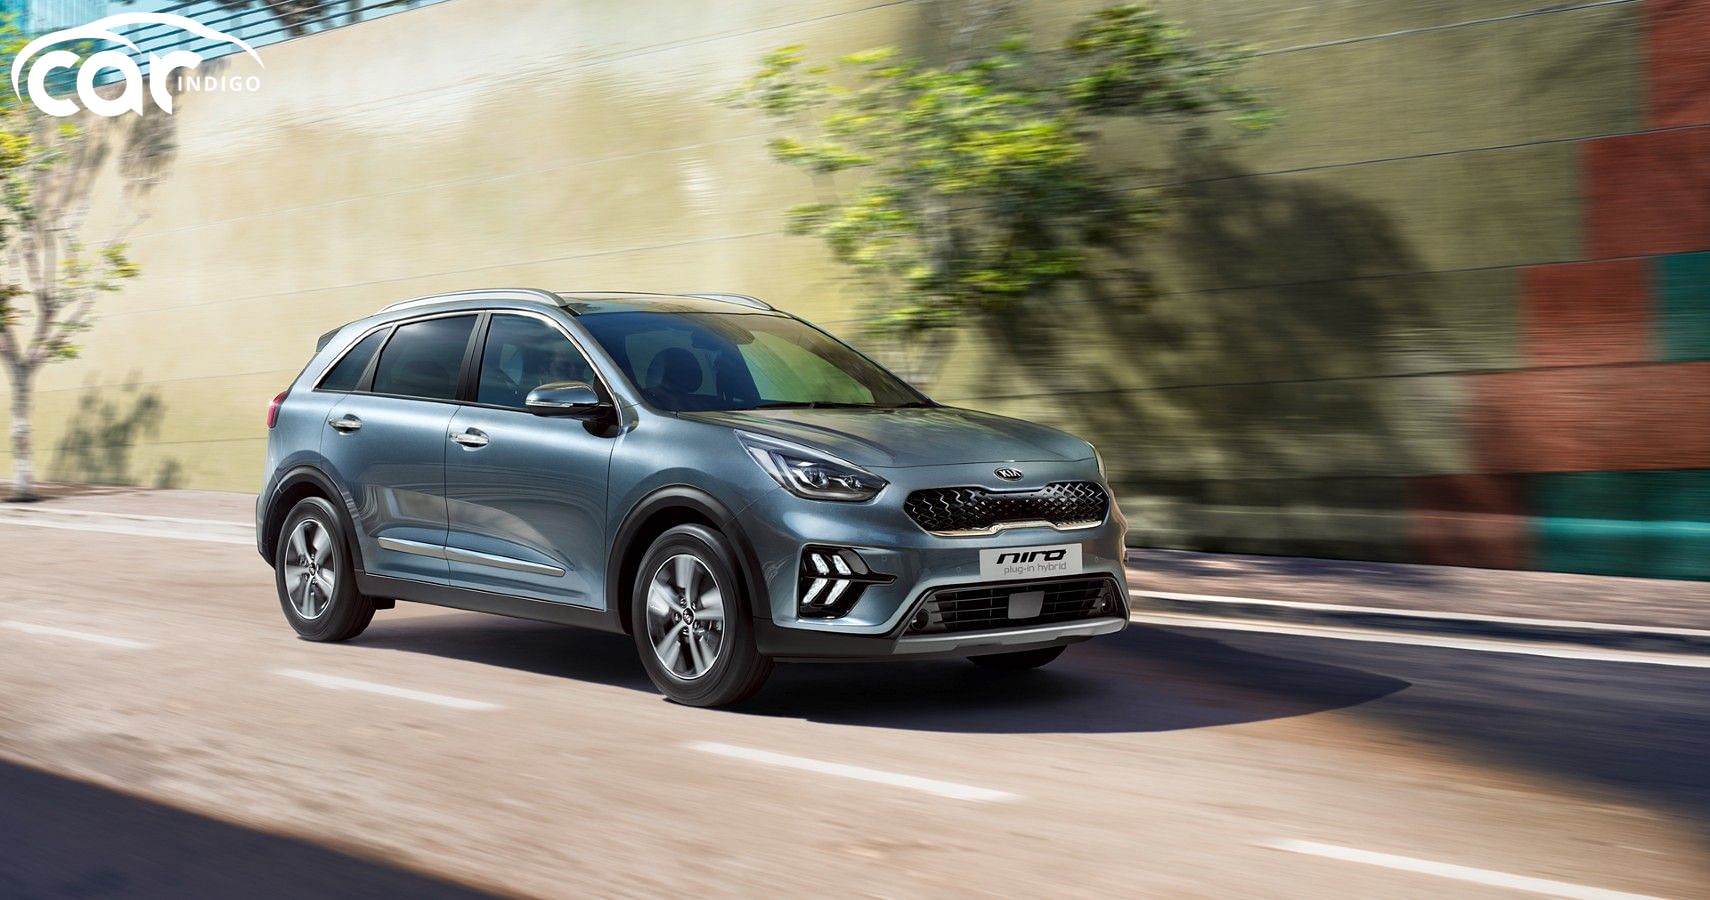 2021 Kia plug-in hybrid SUV Price, Pictures and Ratings